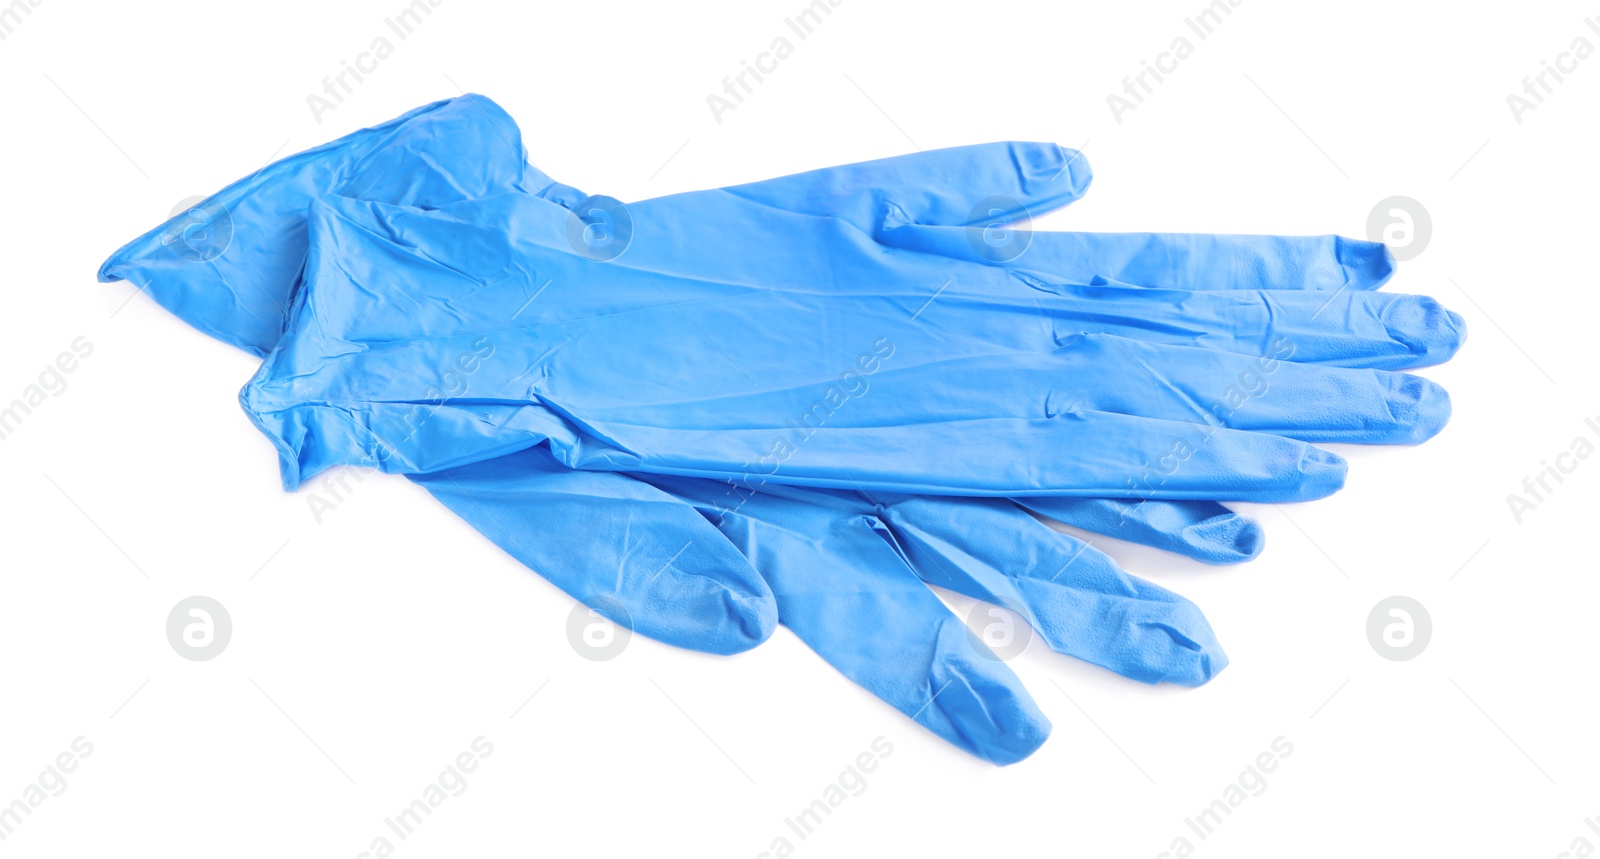 Photo of Pair of medical gloves isolated on white